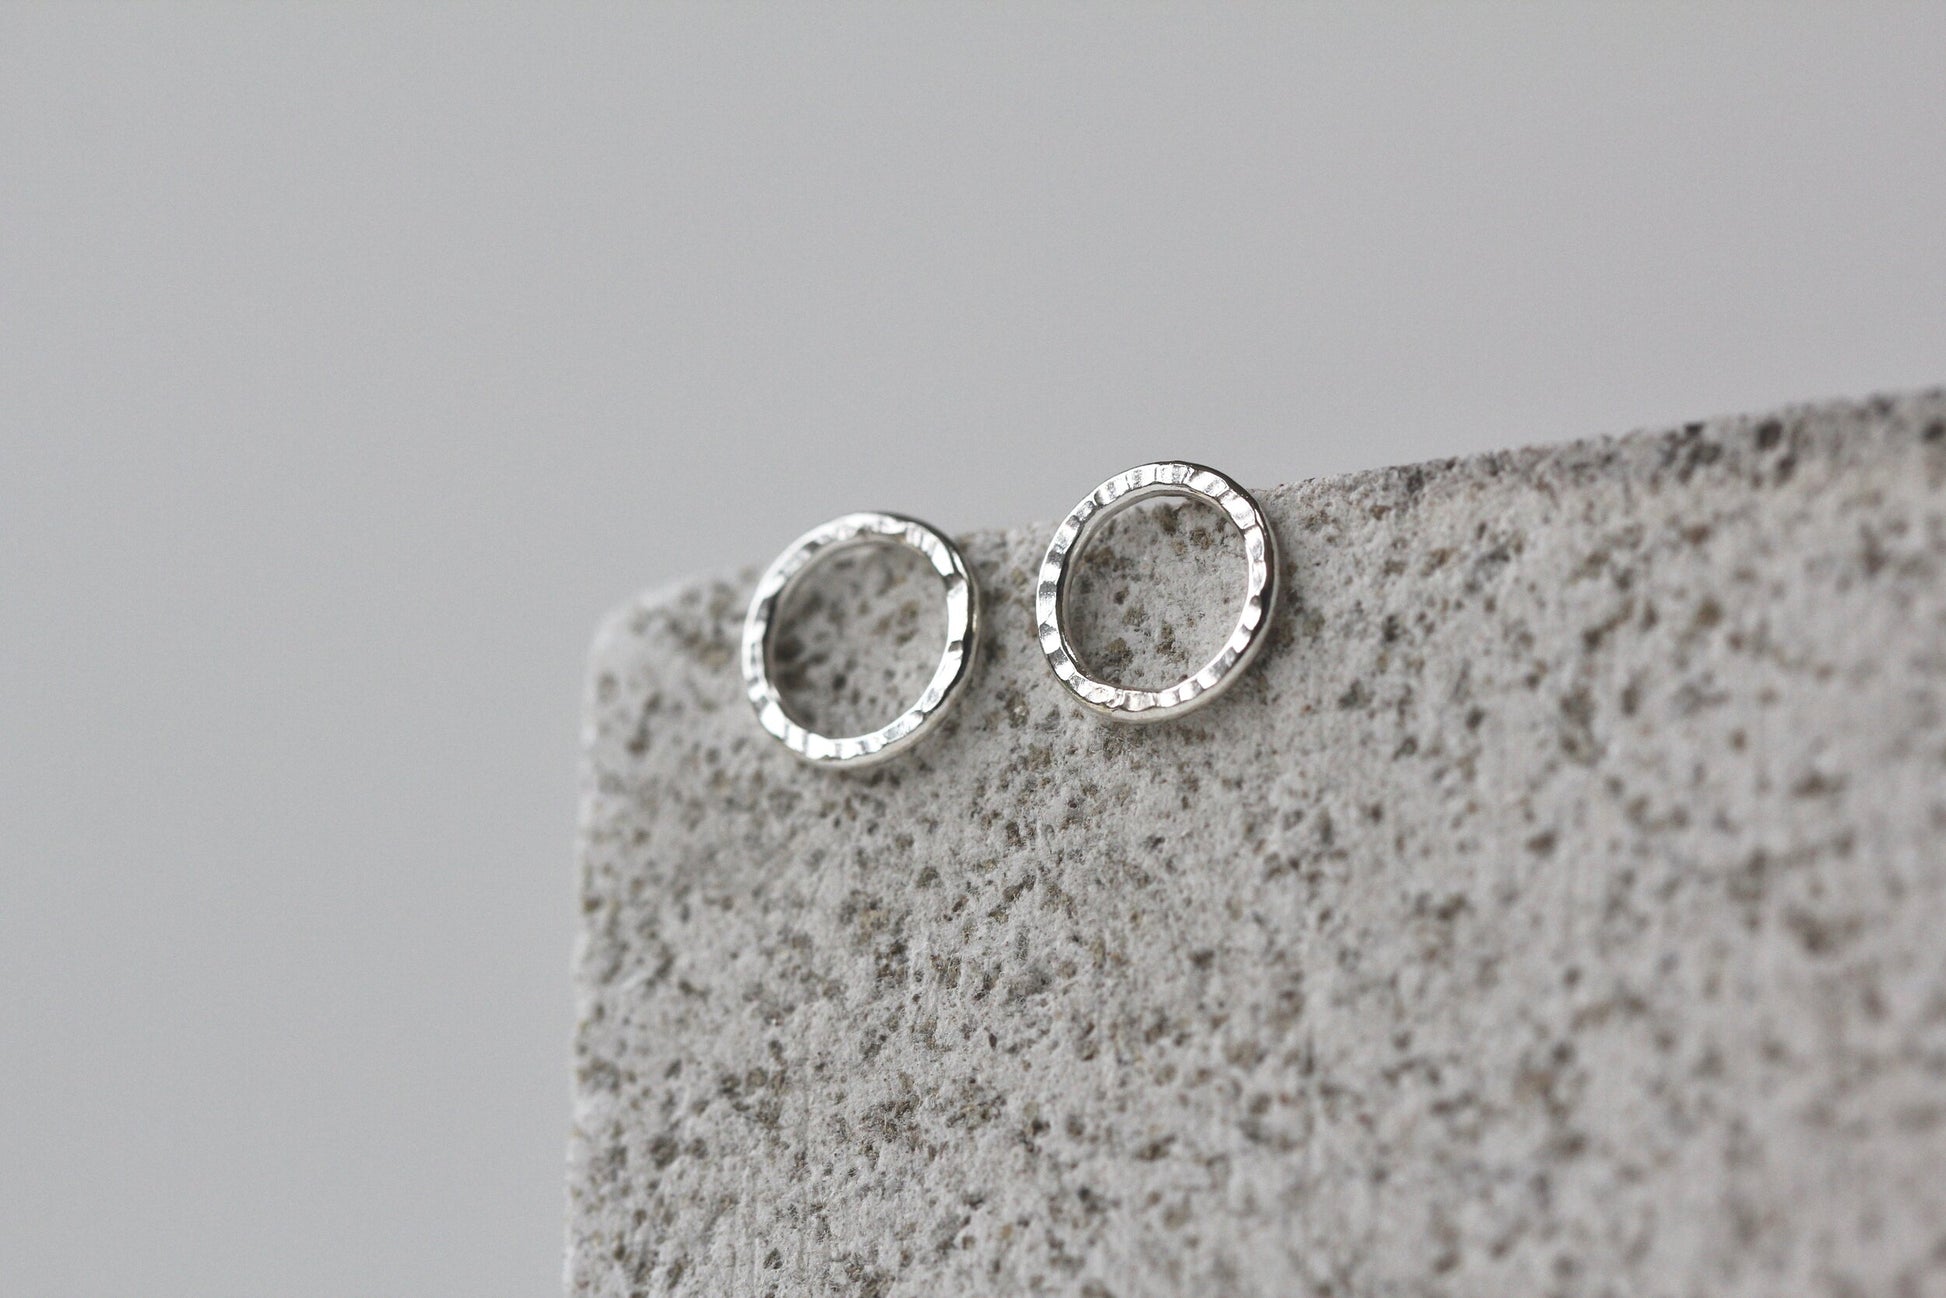 MIA hammered circle stud earrings - The Bristol Artisan Handmade Sustainable Gifts and Homewares.